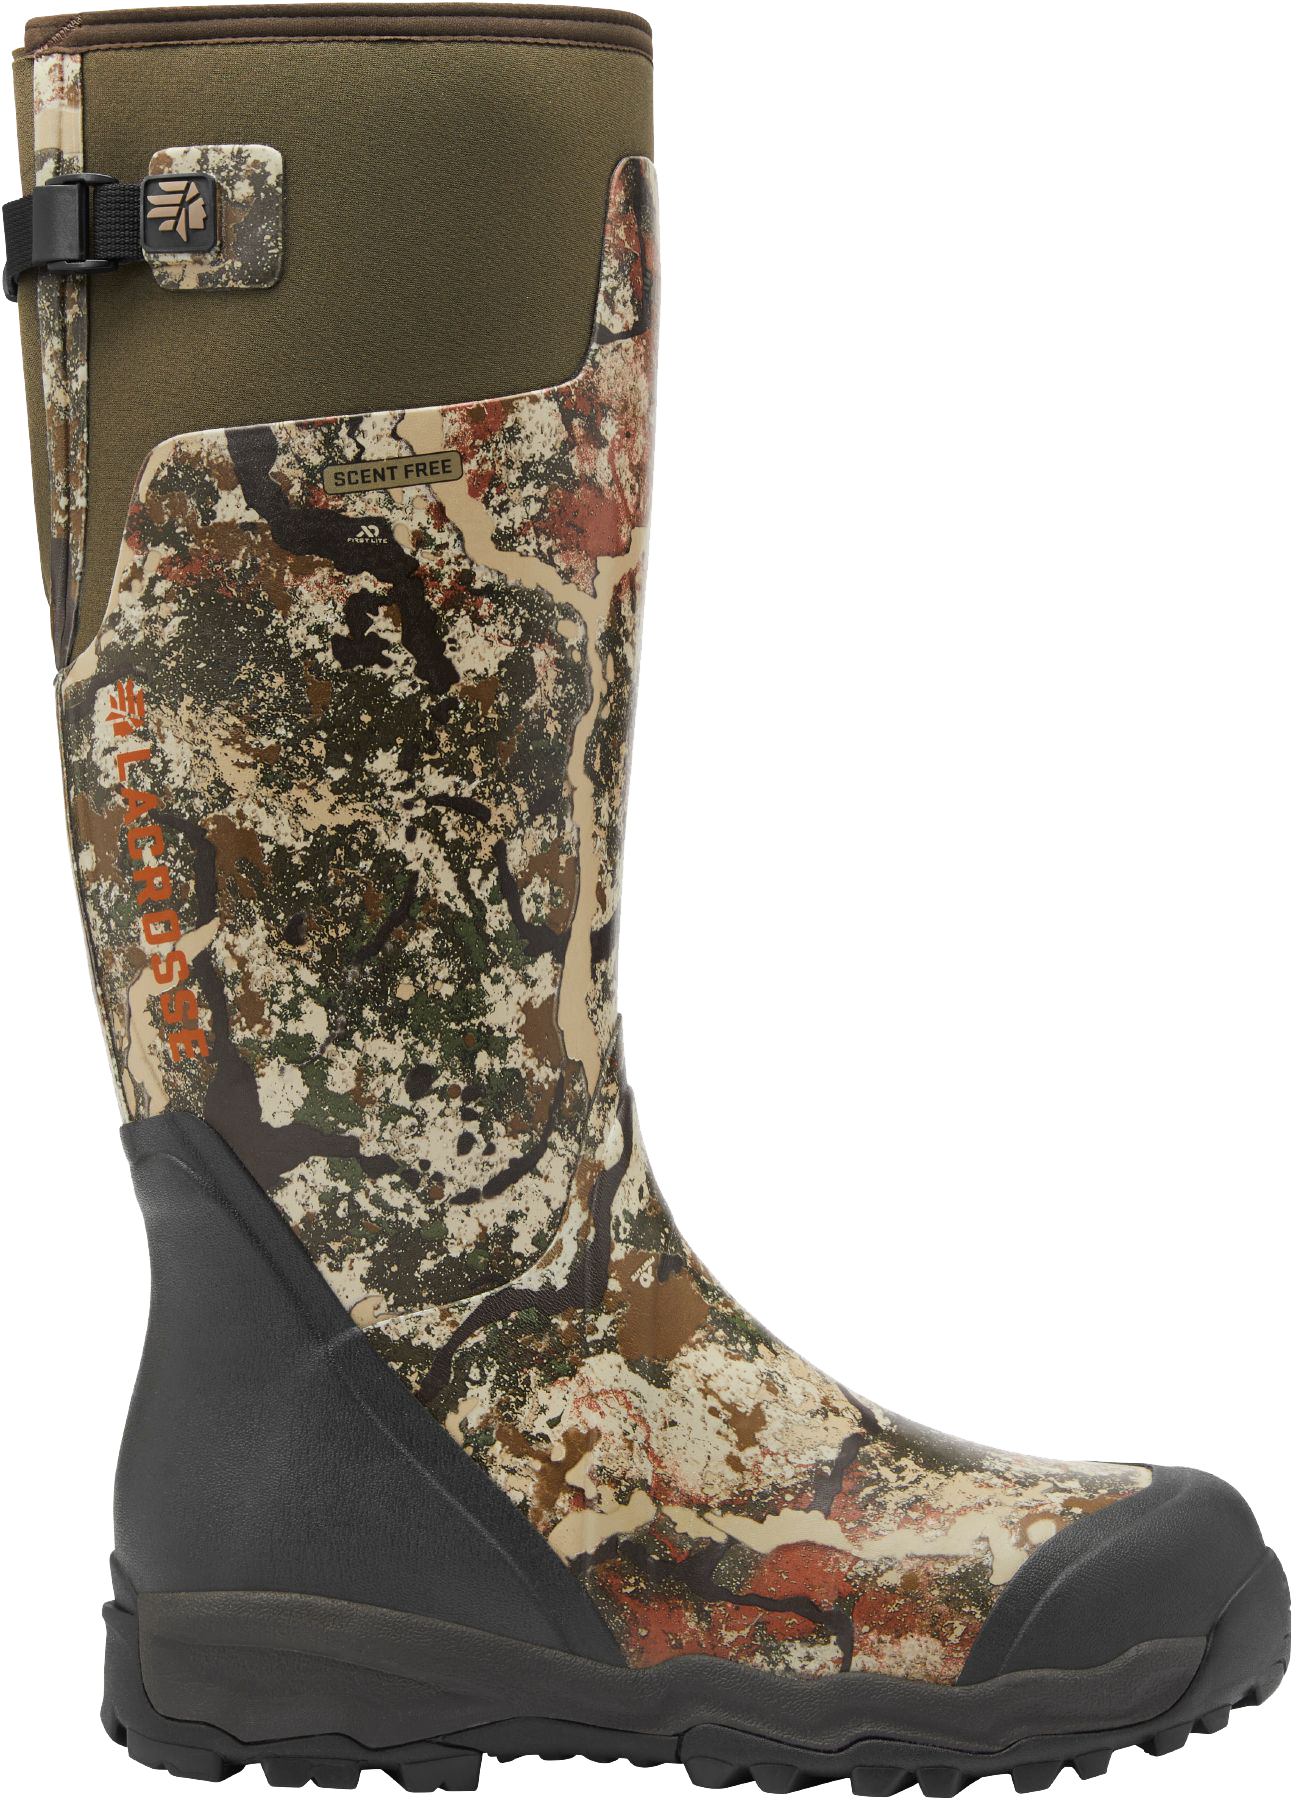 LaCrosse AlphaBurly Pro Hunting Boots for Men - First Lite Specter - 6M